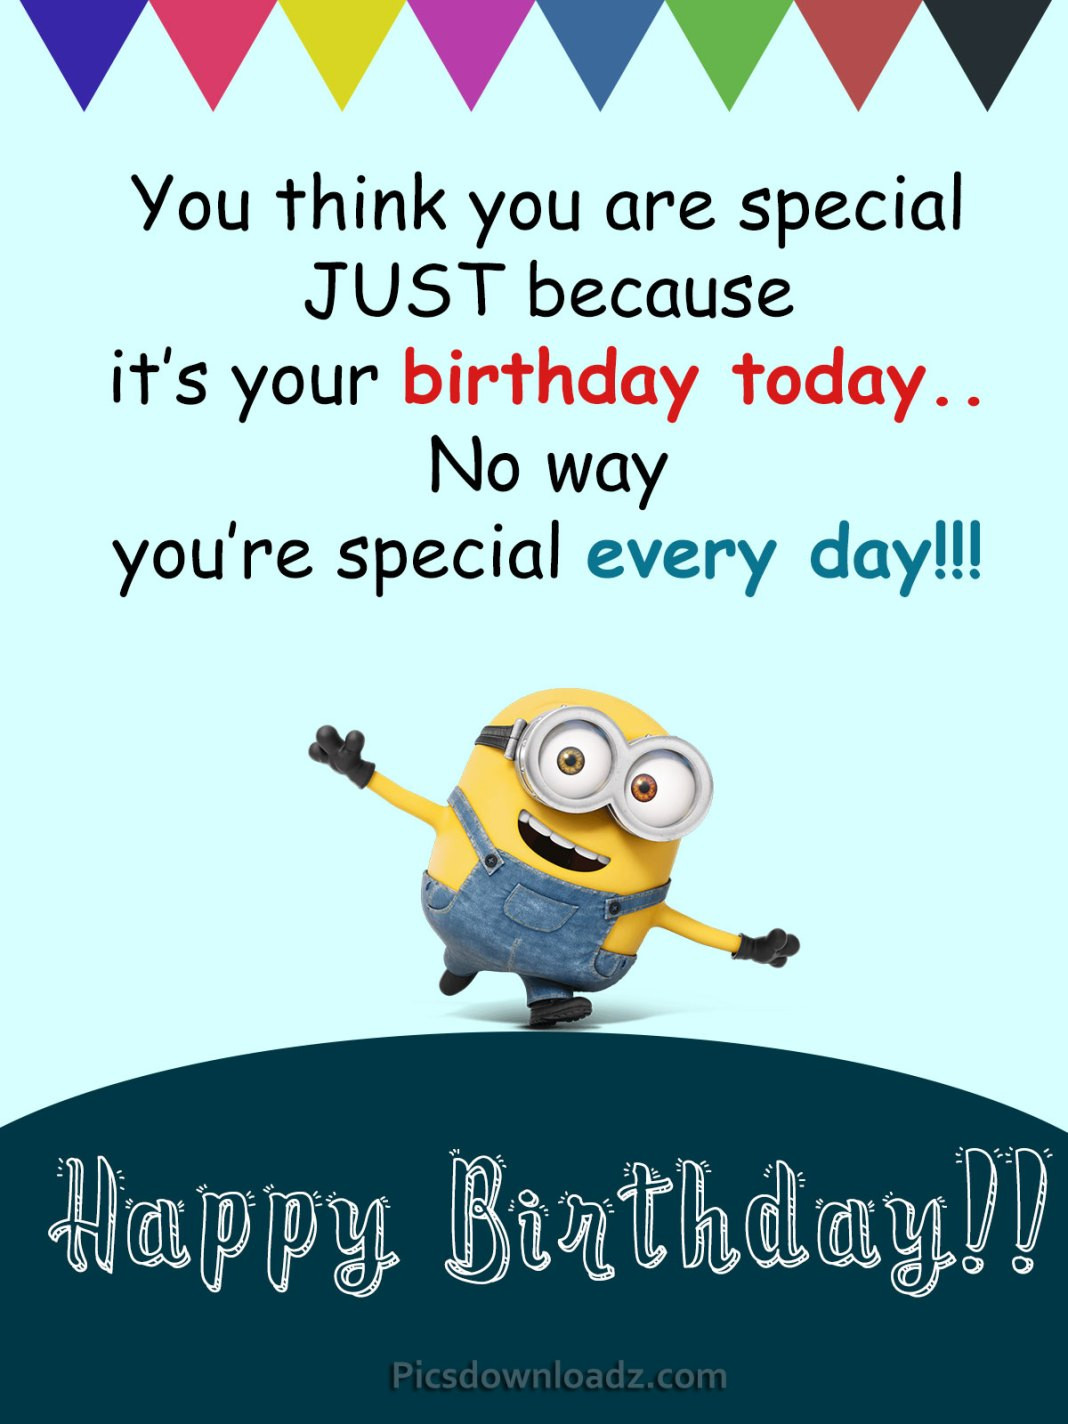 Happy Birthday Friend Quotes Funny
 Funny Happy Birthday Wishes for Best Friend Happy